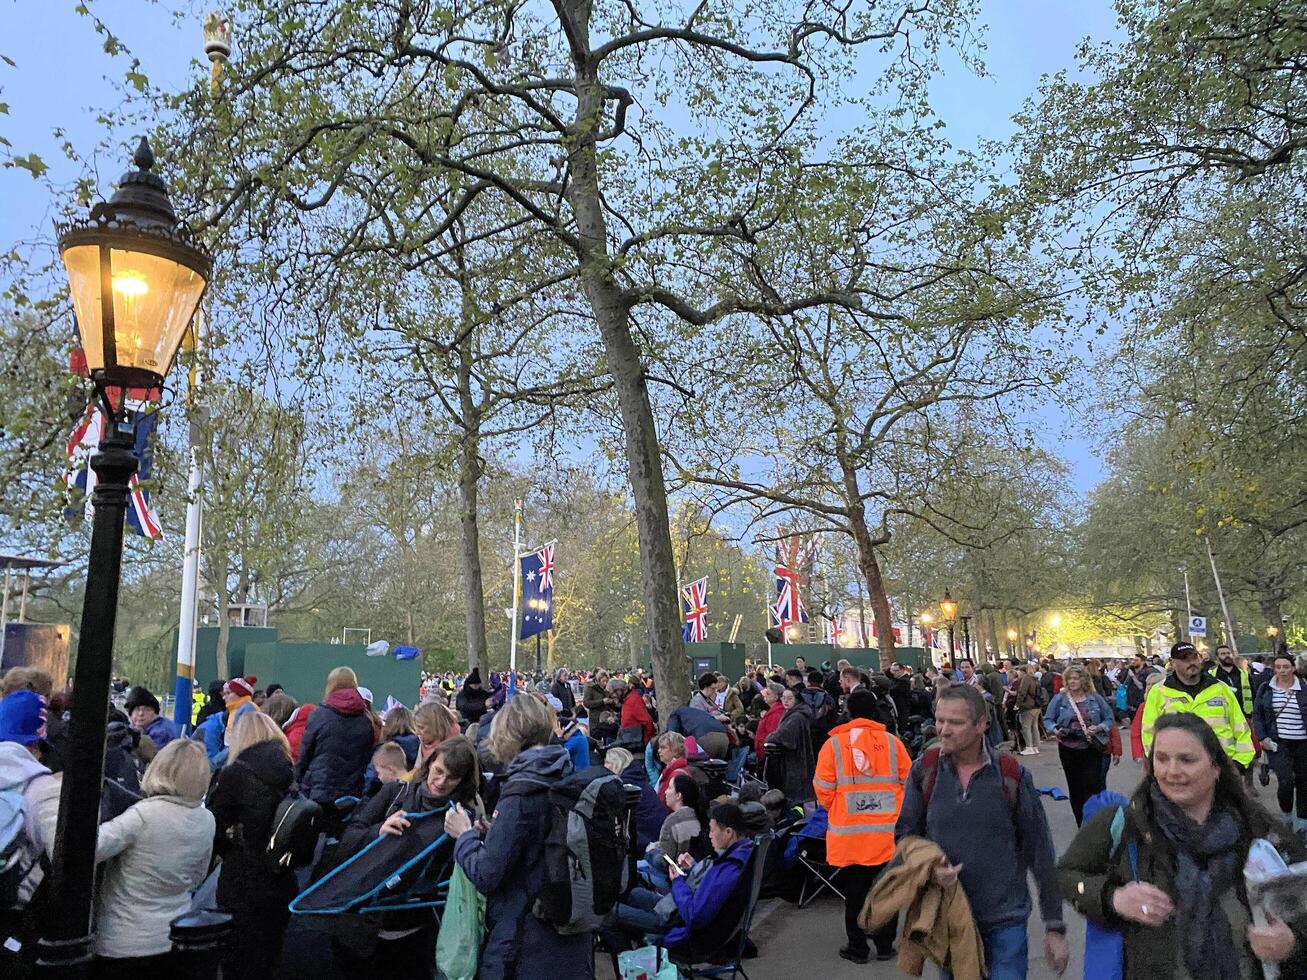 London in the UK on 5 May 2023. People attending the Coronation of King Charles III photo